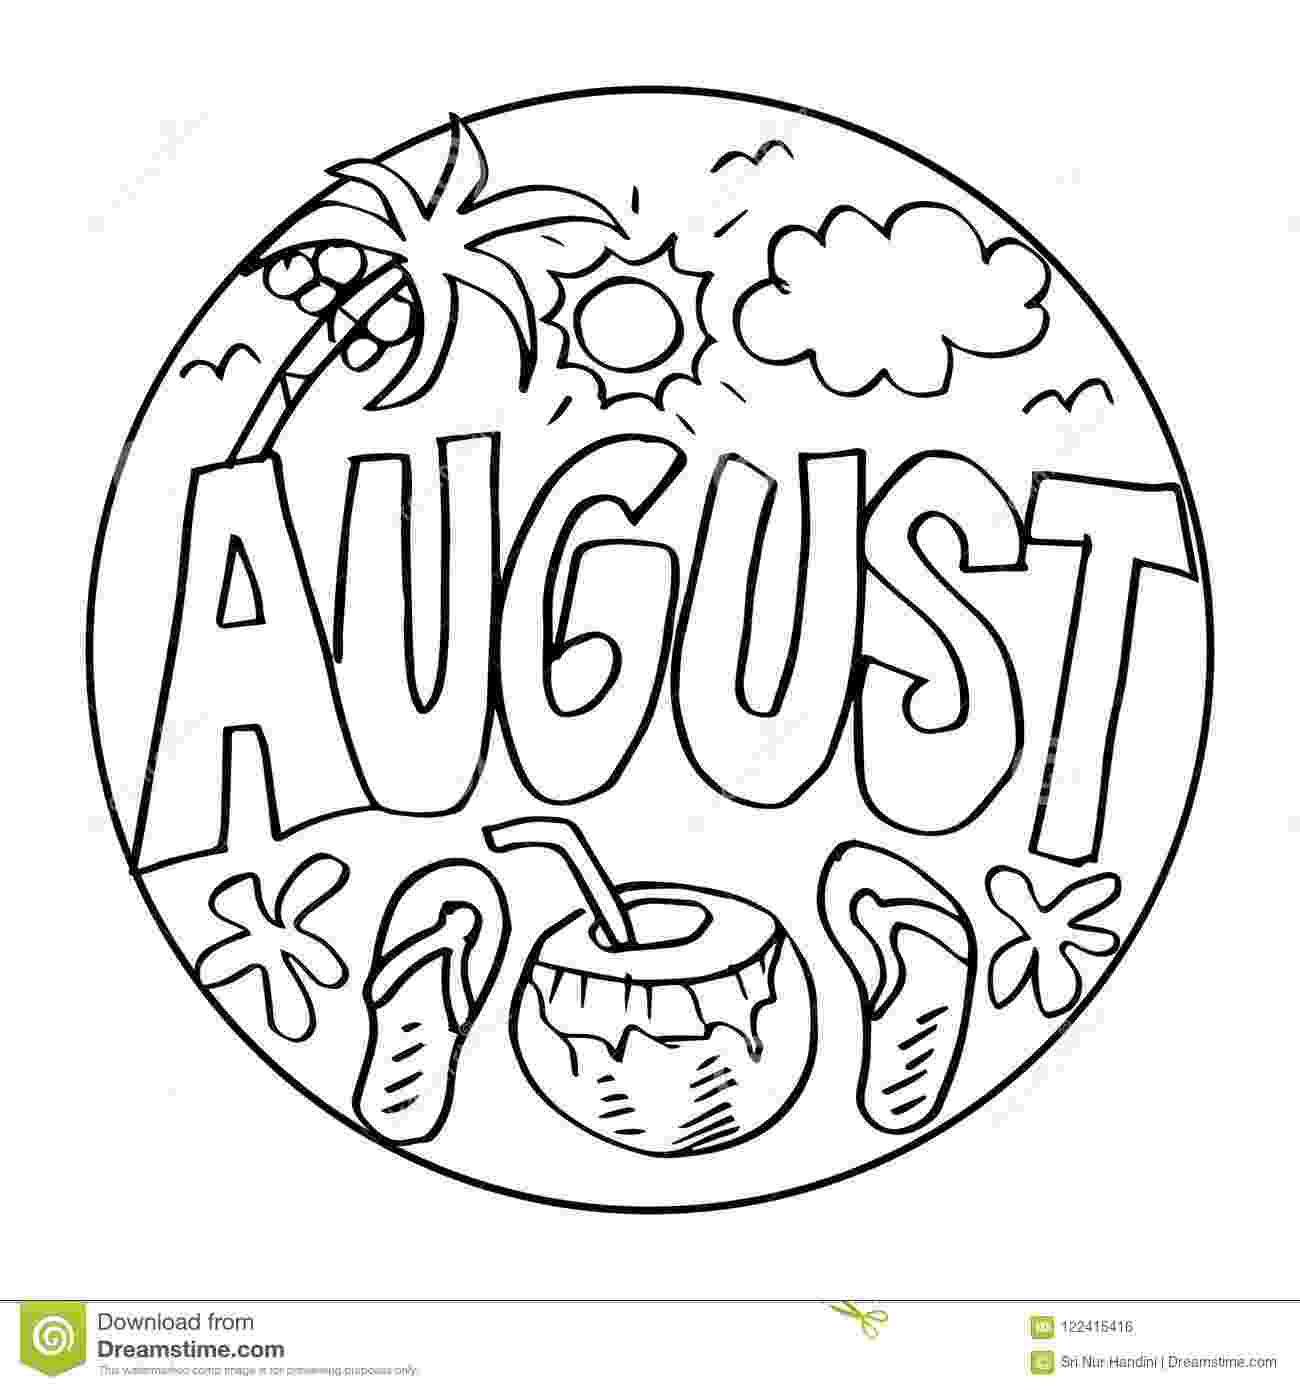 august coloring pages august coloring pages to download and print for free pages coloring august 